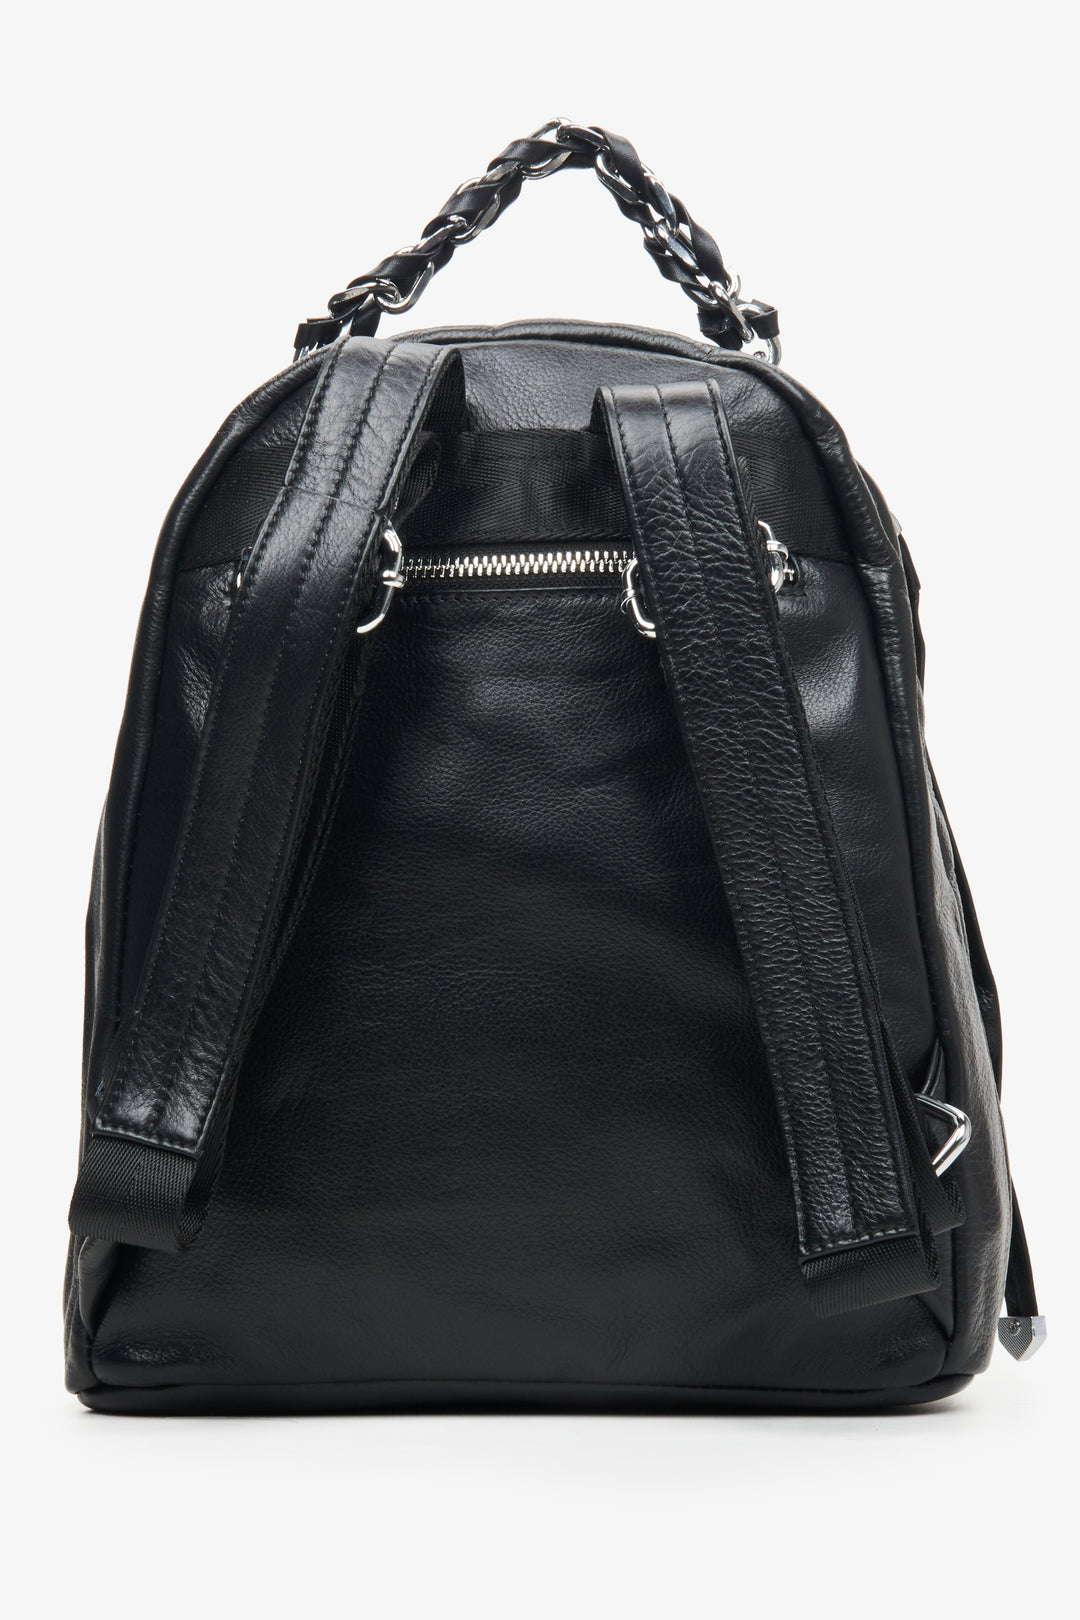 Estro's large, women's black  leather  backpack - close-up of the back and model's shoulders.